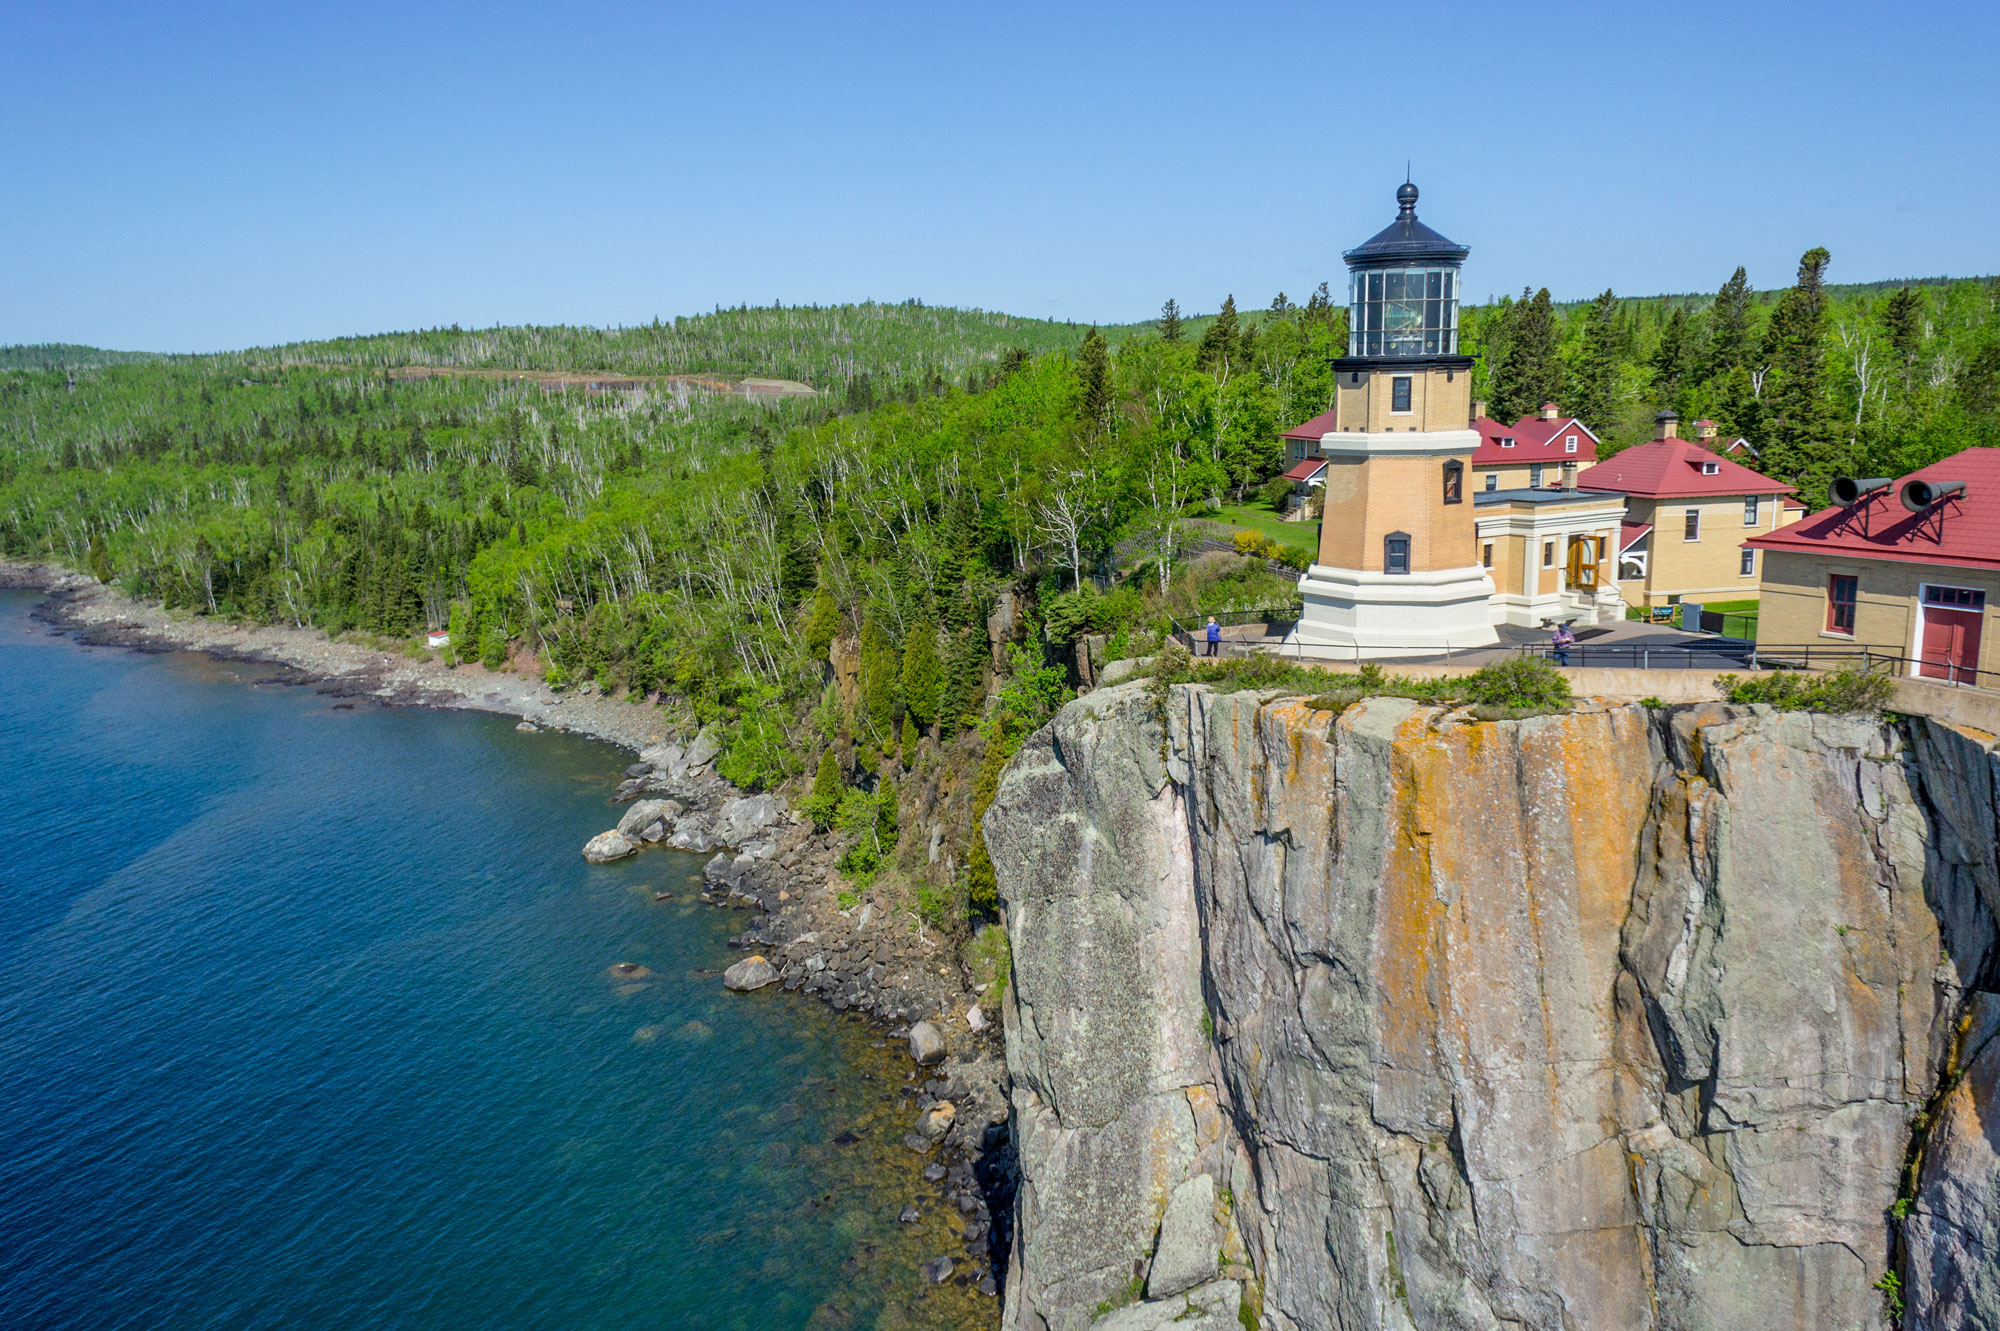 Split Rock Lighthouse located on the shore of Lake Superior.